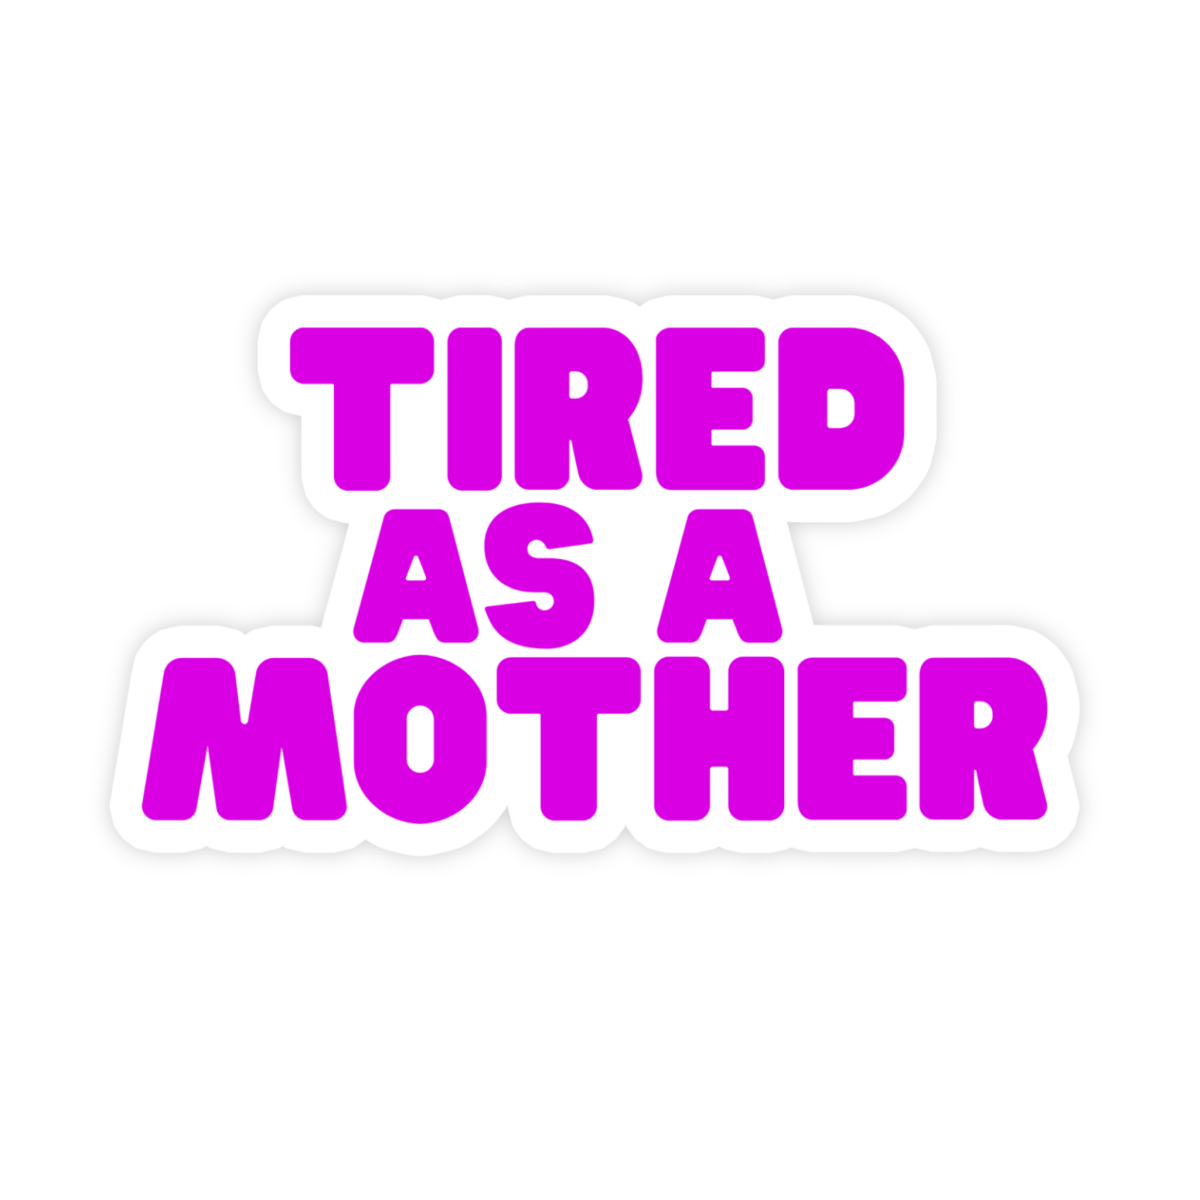 Tired As A Mother Sticker For Moms - stickerbullTired As A Mother Sticker For MomsRetail StickerstickerbullstickerbullTaylor_TiredMother [#15]Tired As A Mother Sticker For Moms